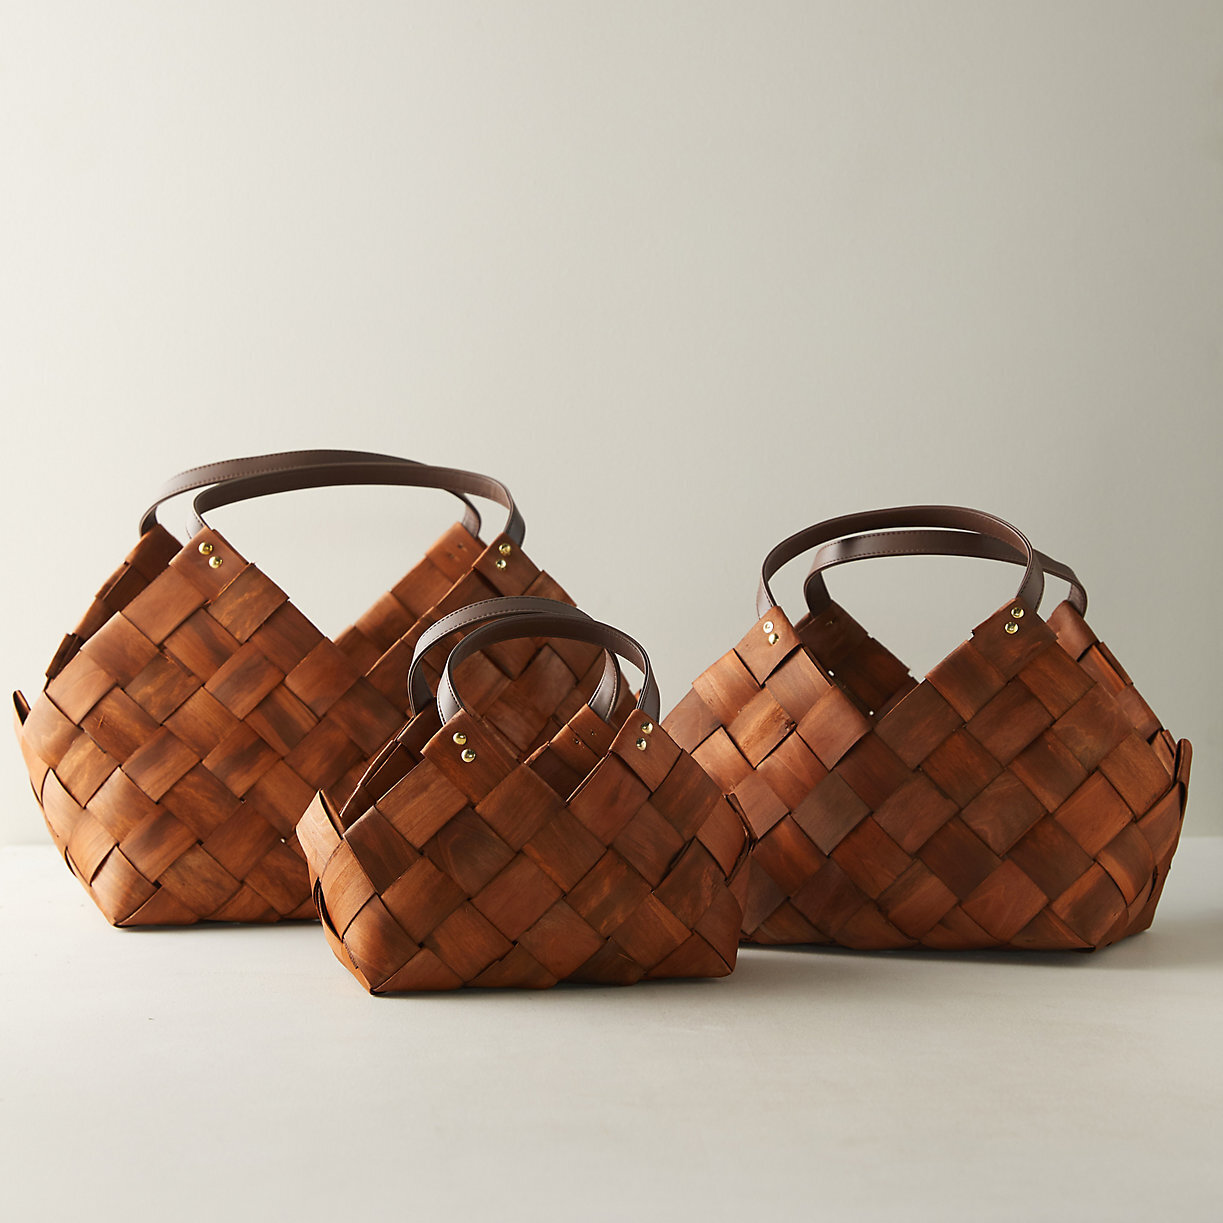 Woven Seagrass Basket with Leather Handles, Terrain